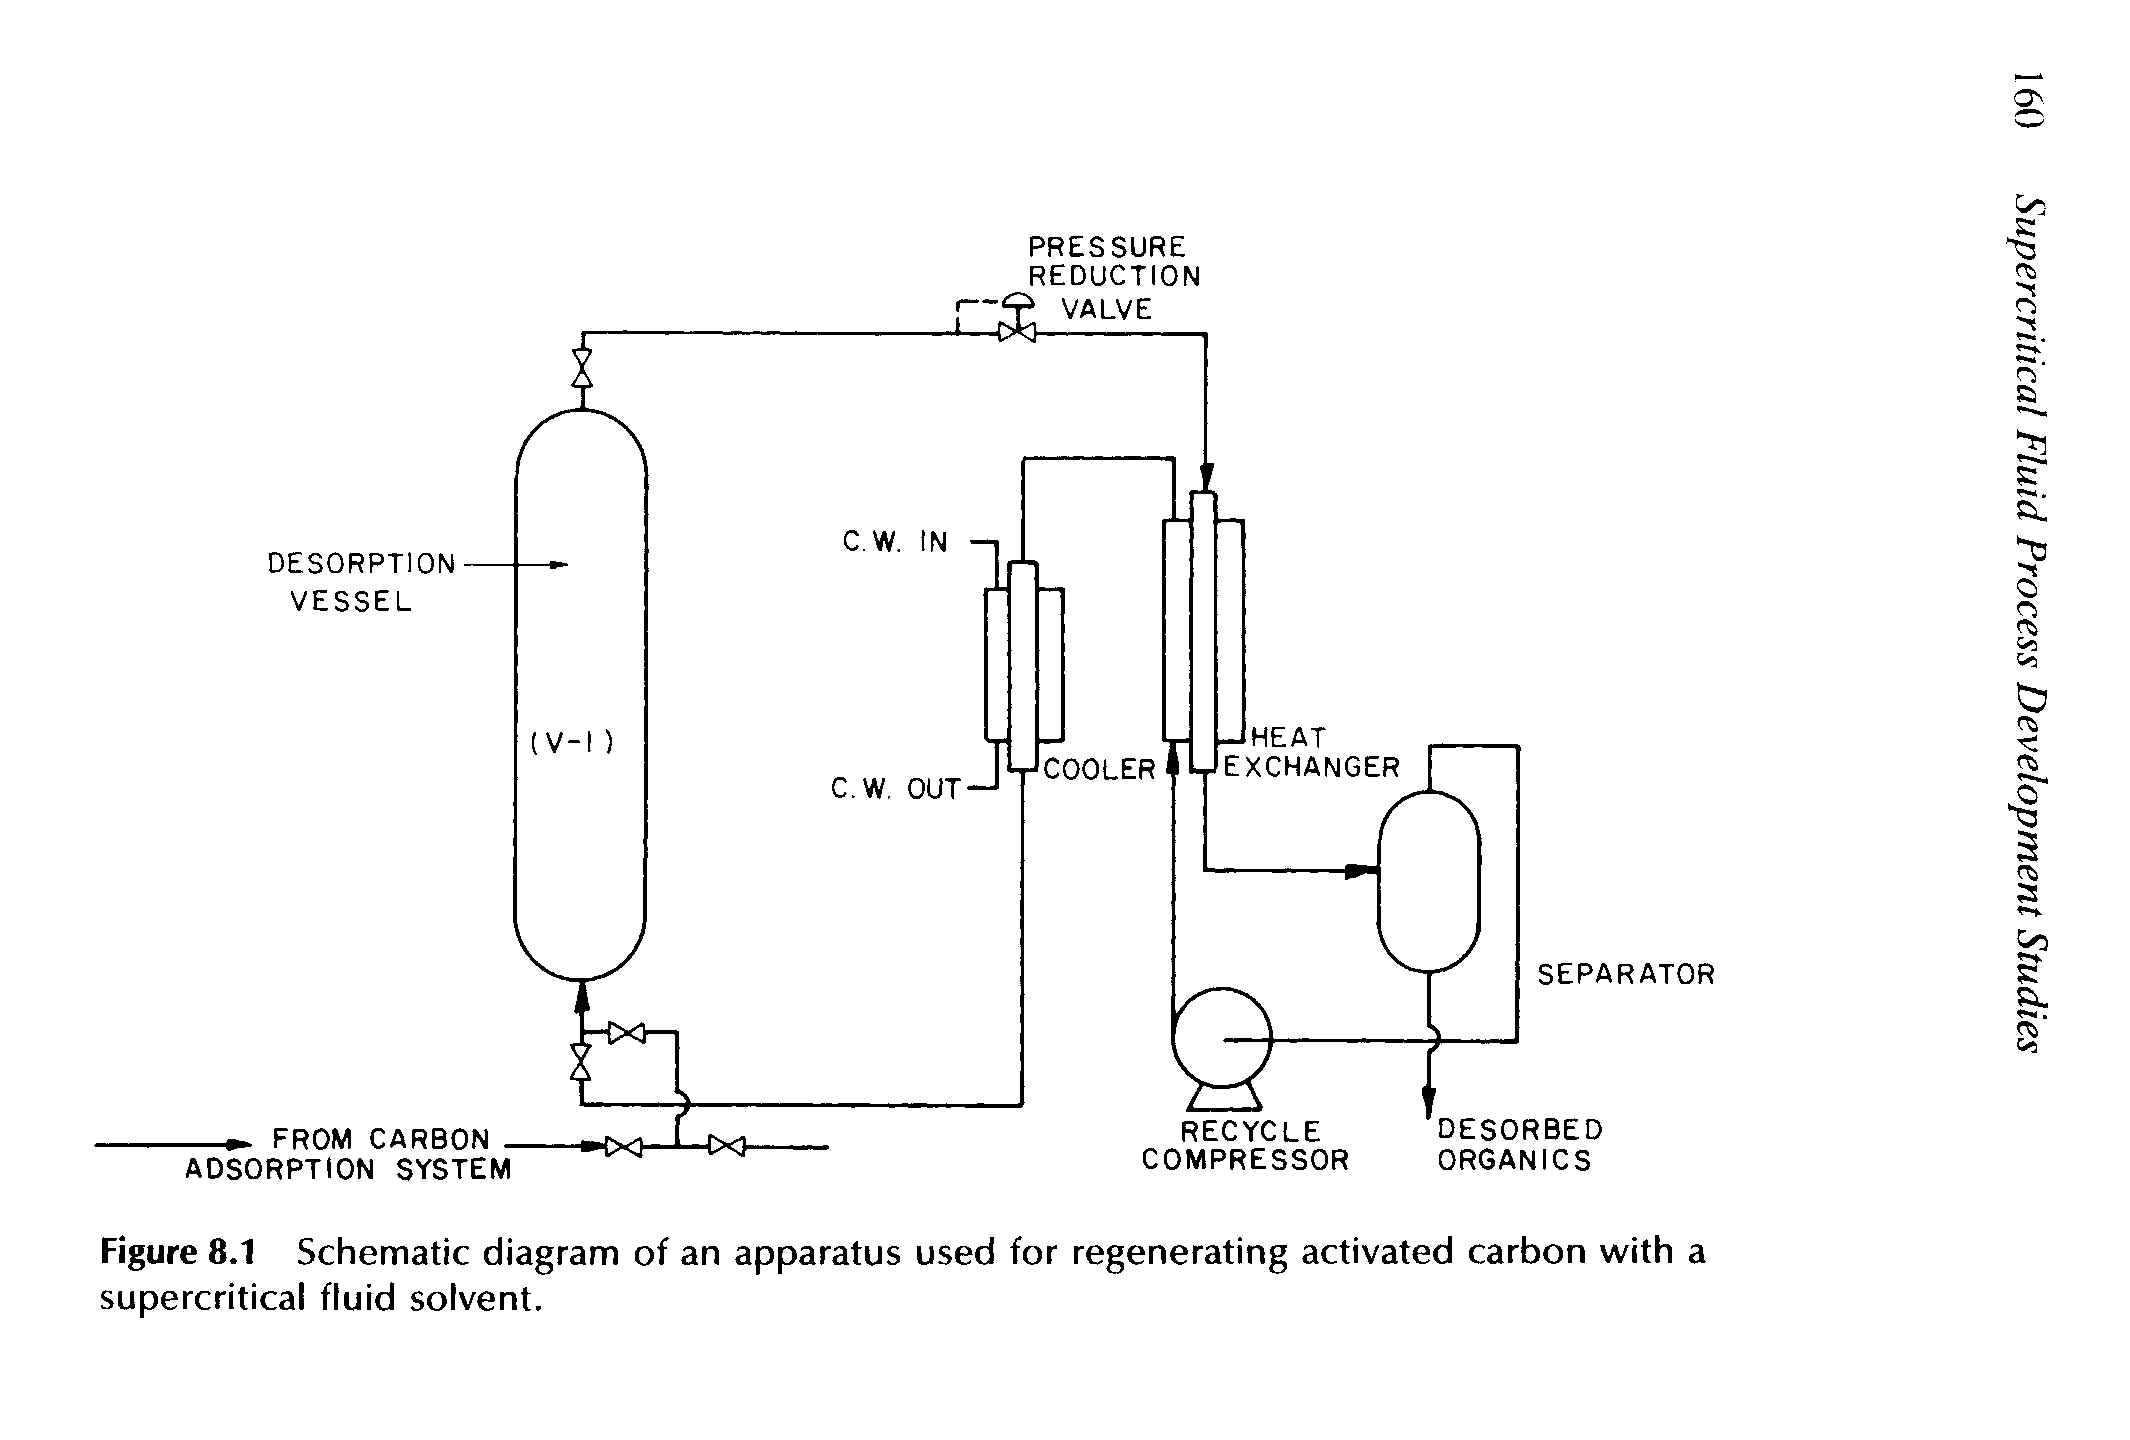 Figure 8.1 Schematic diagram of an apparatus used for regenerating activated carbon with a supercritical fluid solvent.